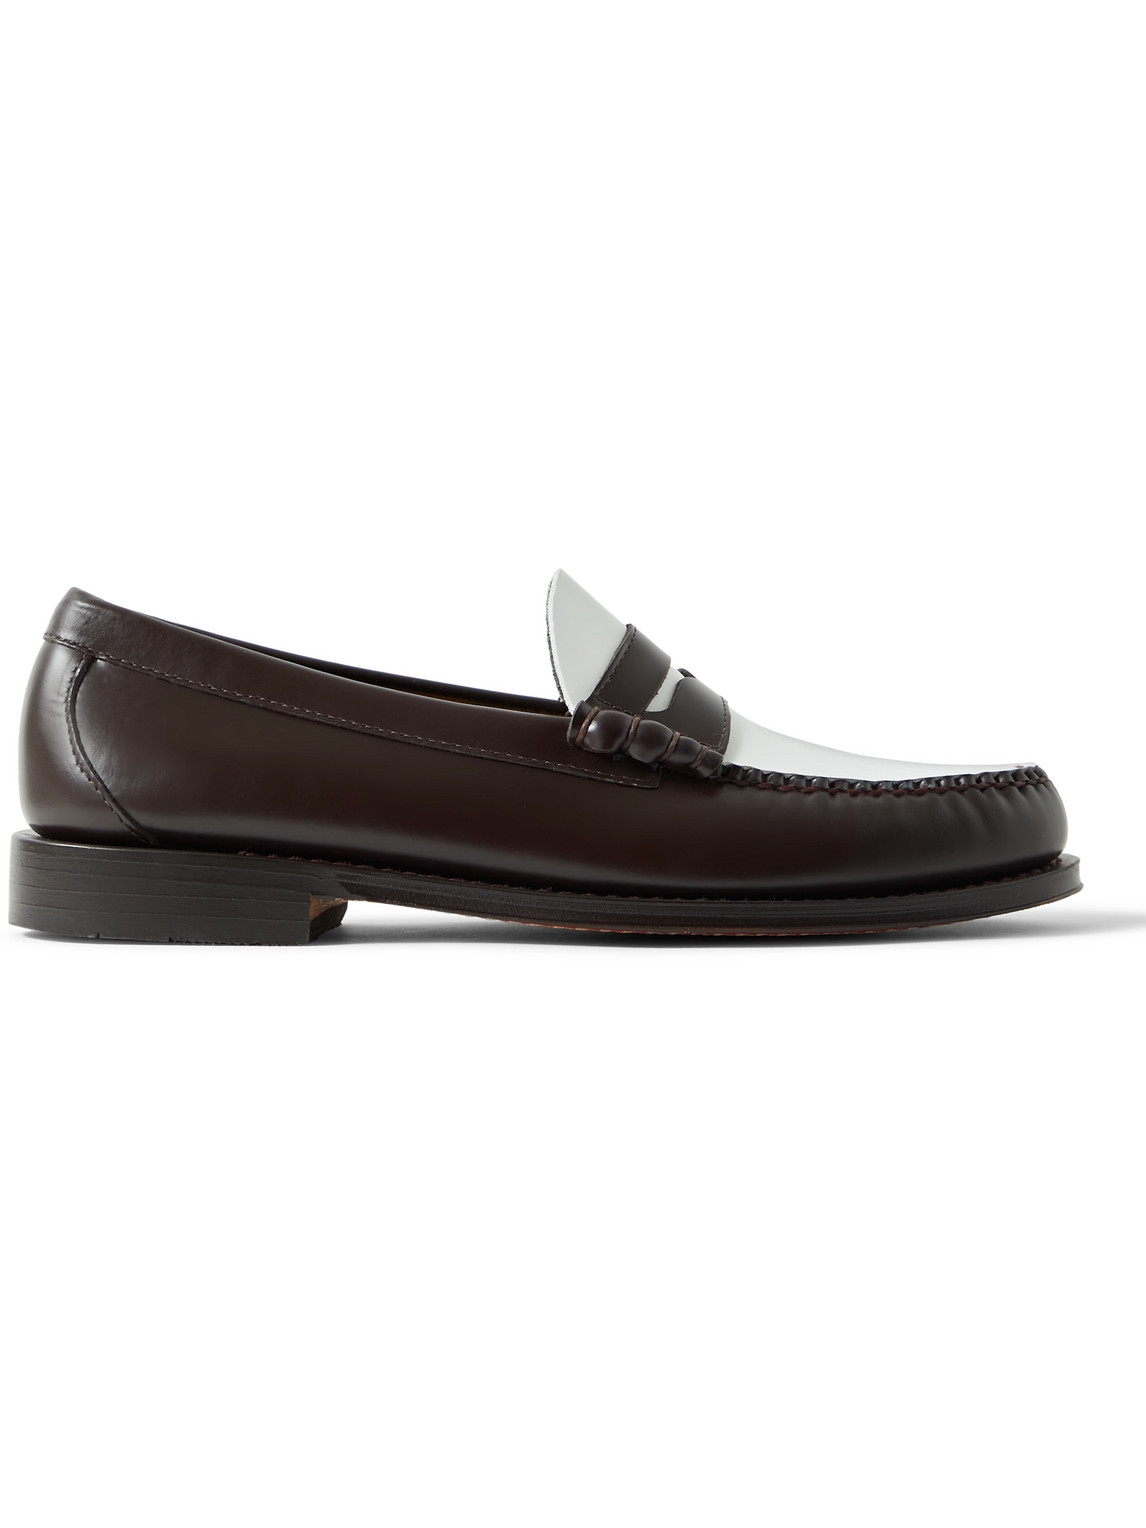 G.h. Bass & Co. Weejuns Heritage Larson Colour-block Leather Penny Loafers In Brown